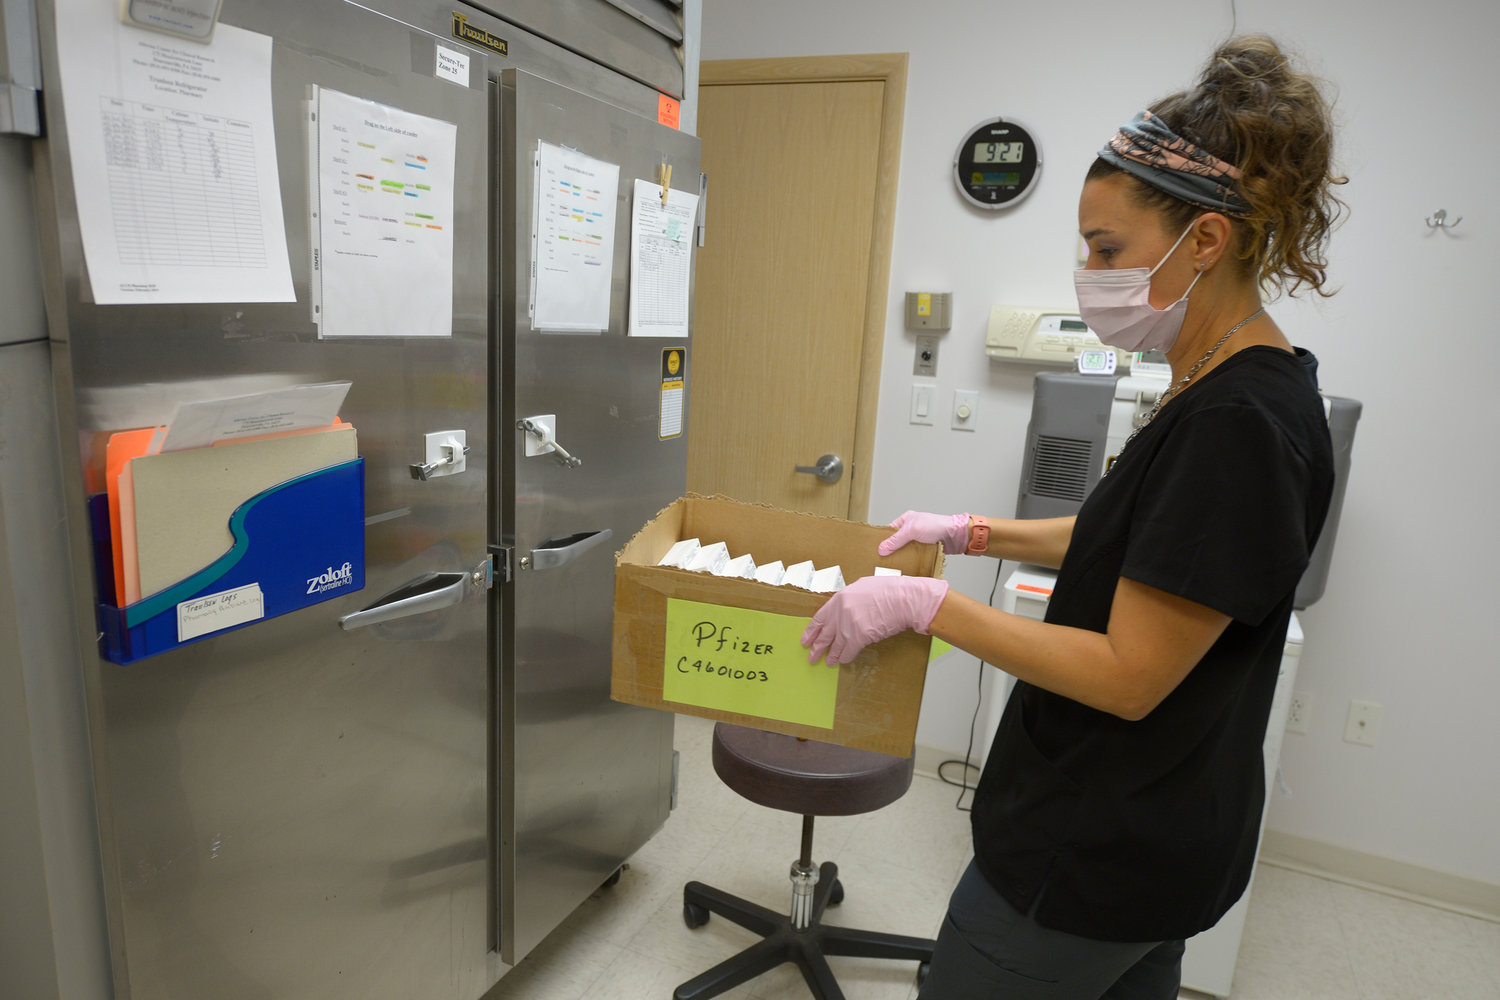 Janae Roland, a registered nurse at the Altoona Center for Clinical Research begins the process of preparing refrigerated doses of a new Lyme disease vaccine Friday, Aug. 5, 2022, in Duncansville, Pa. (AP Photo/Gary M. Baranec)